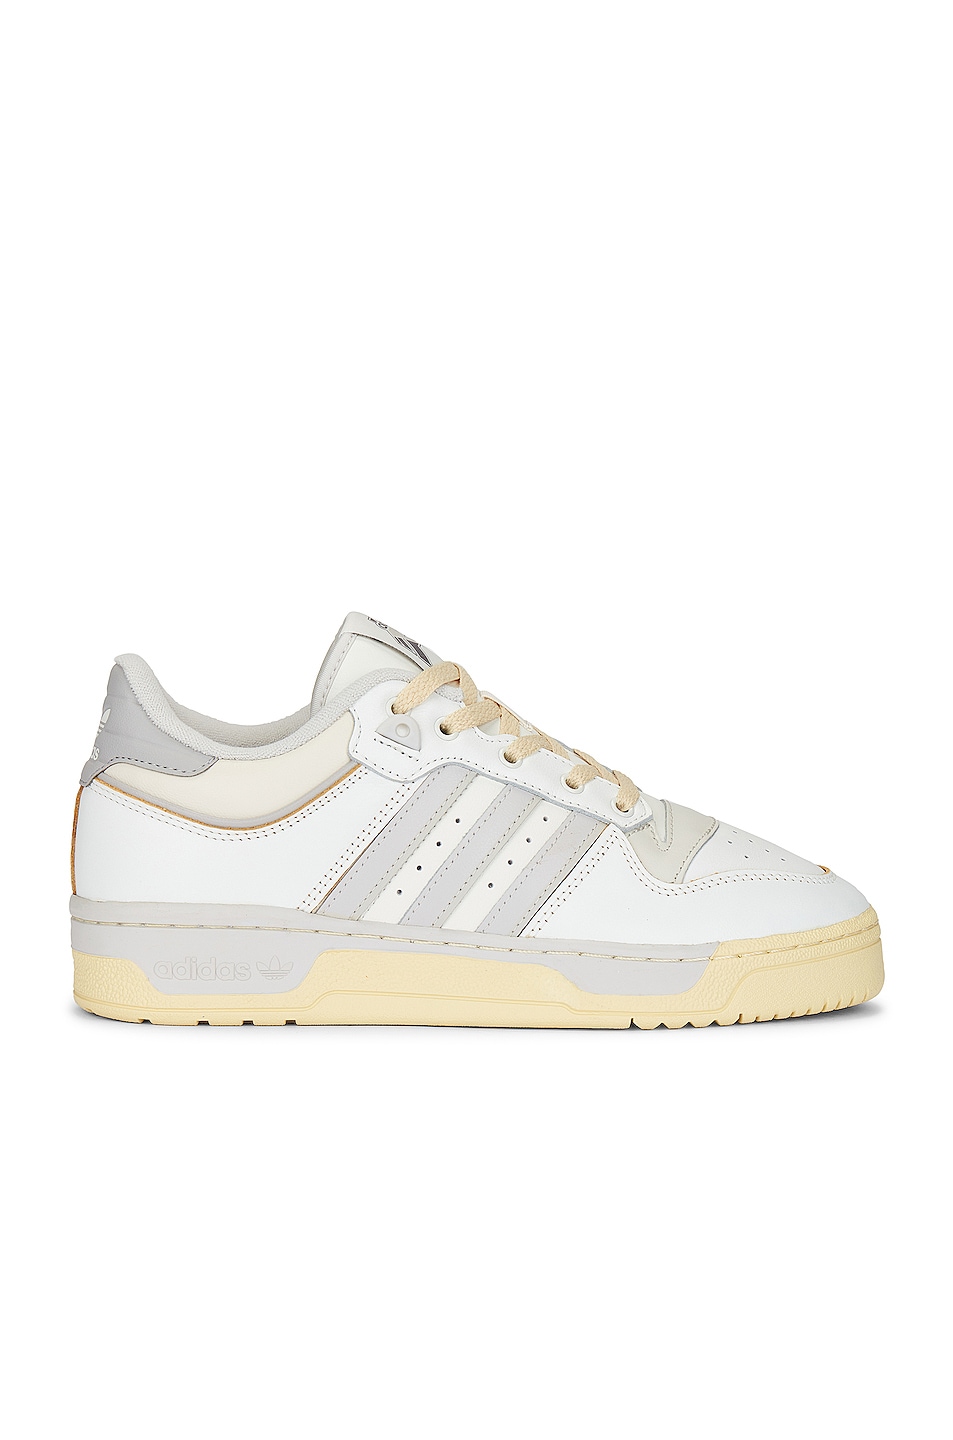 Image 1 of adidas Originals Rivalry Low Shoe in White, Grey, & Off White